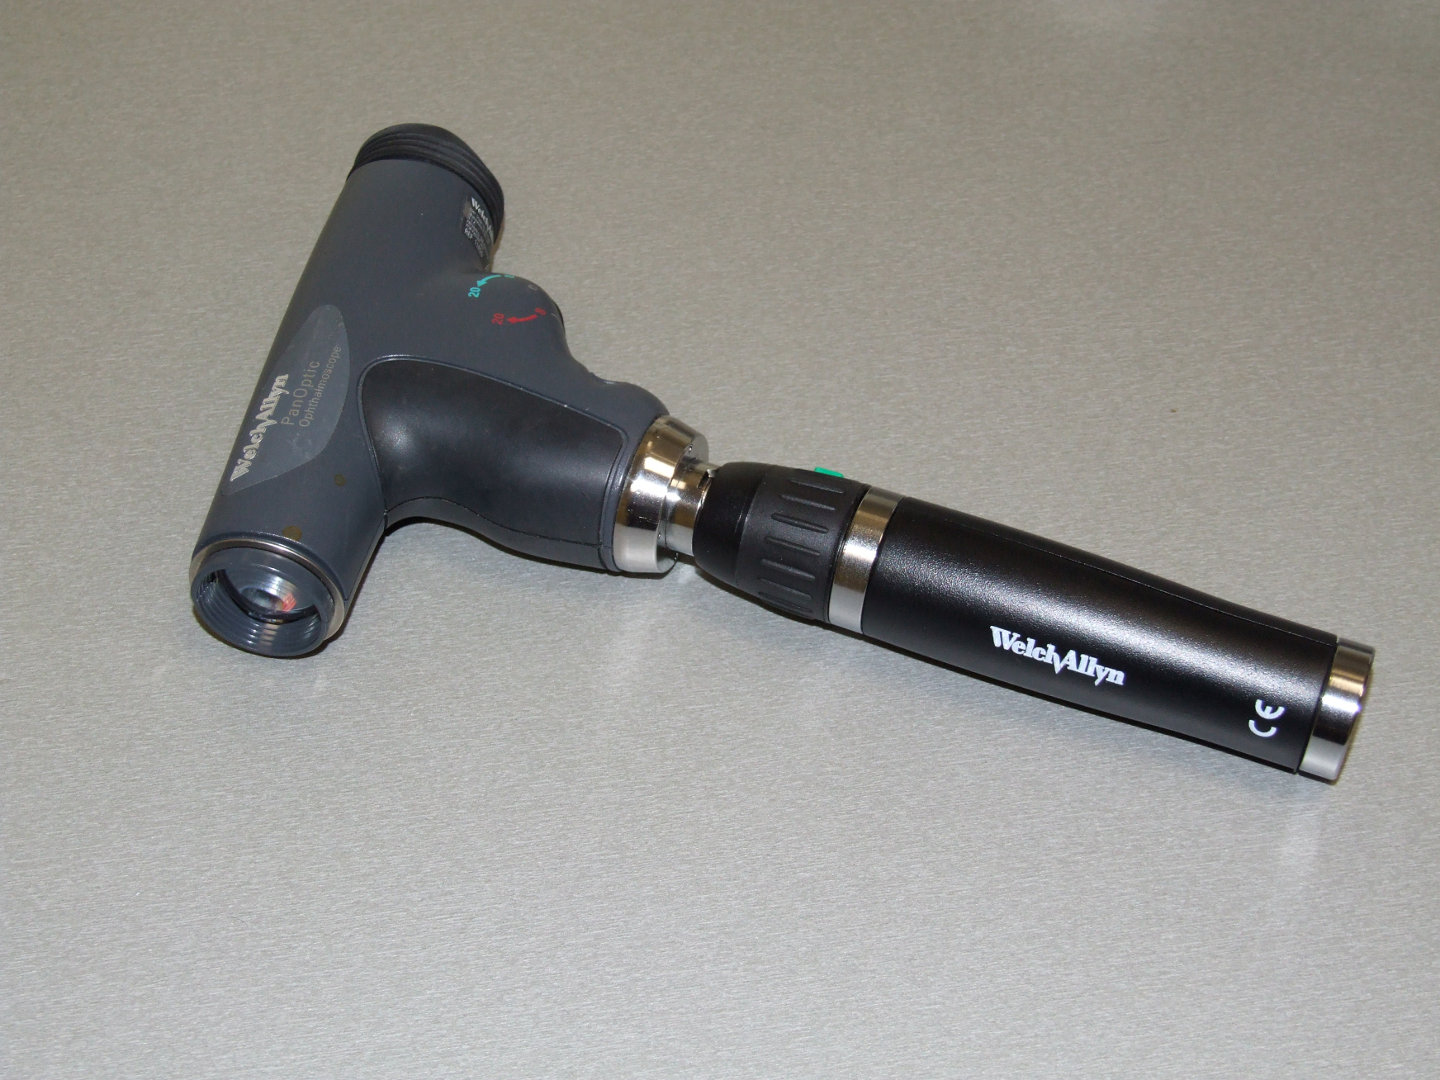 Monocular Ophthalmoscope | UseScience